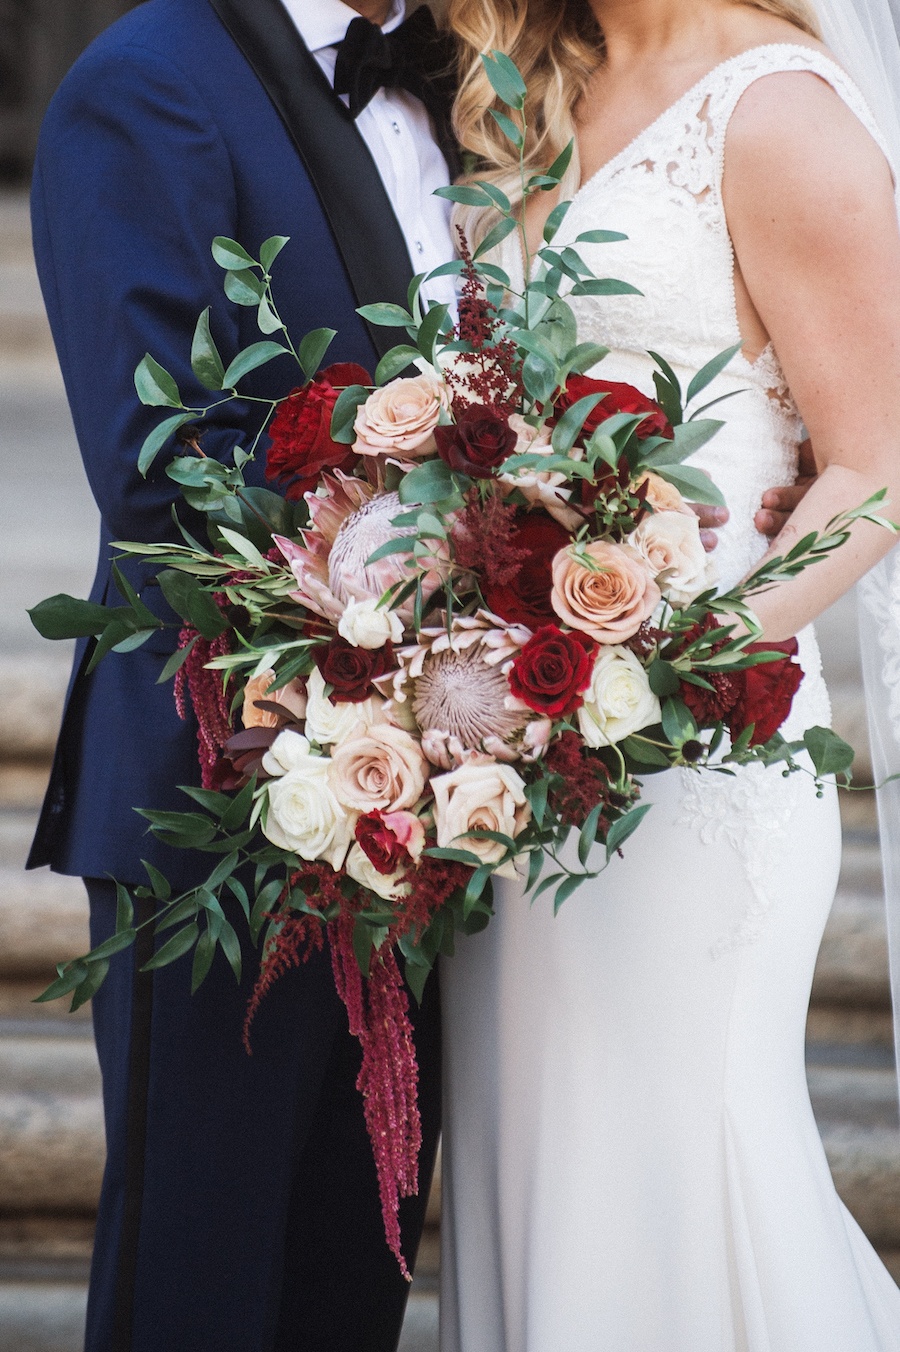 29 Fall Bridal Bouquets That Are Beautiful Beyond Words,Small Monkey For Sale